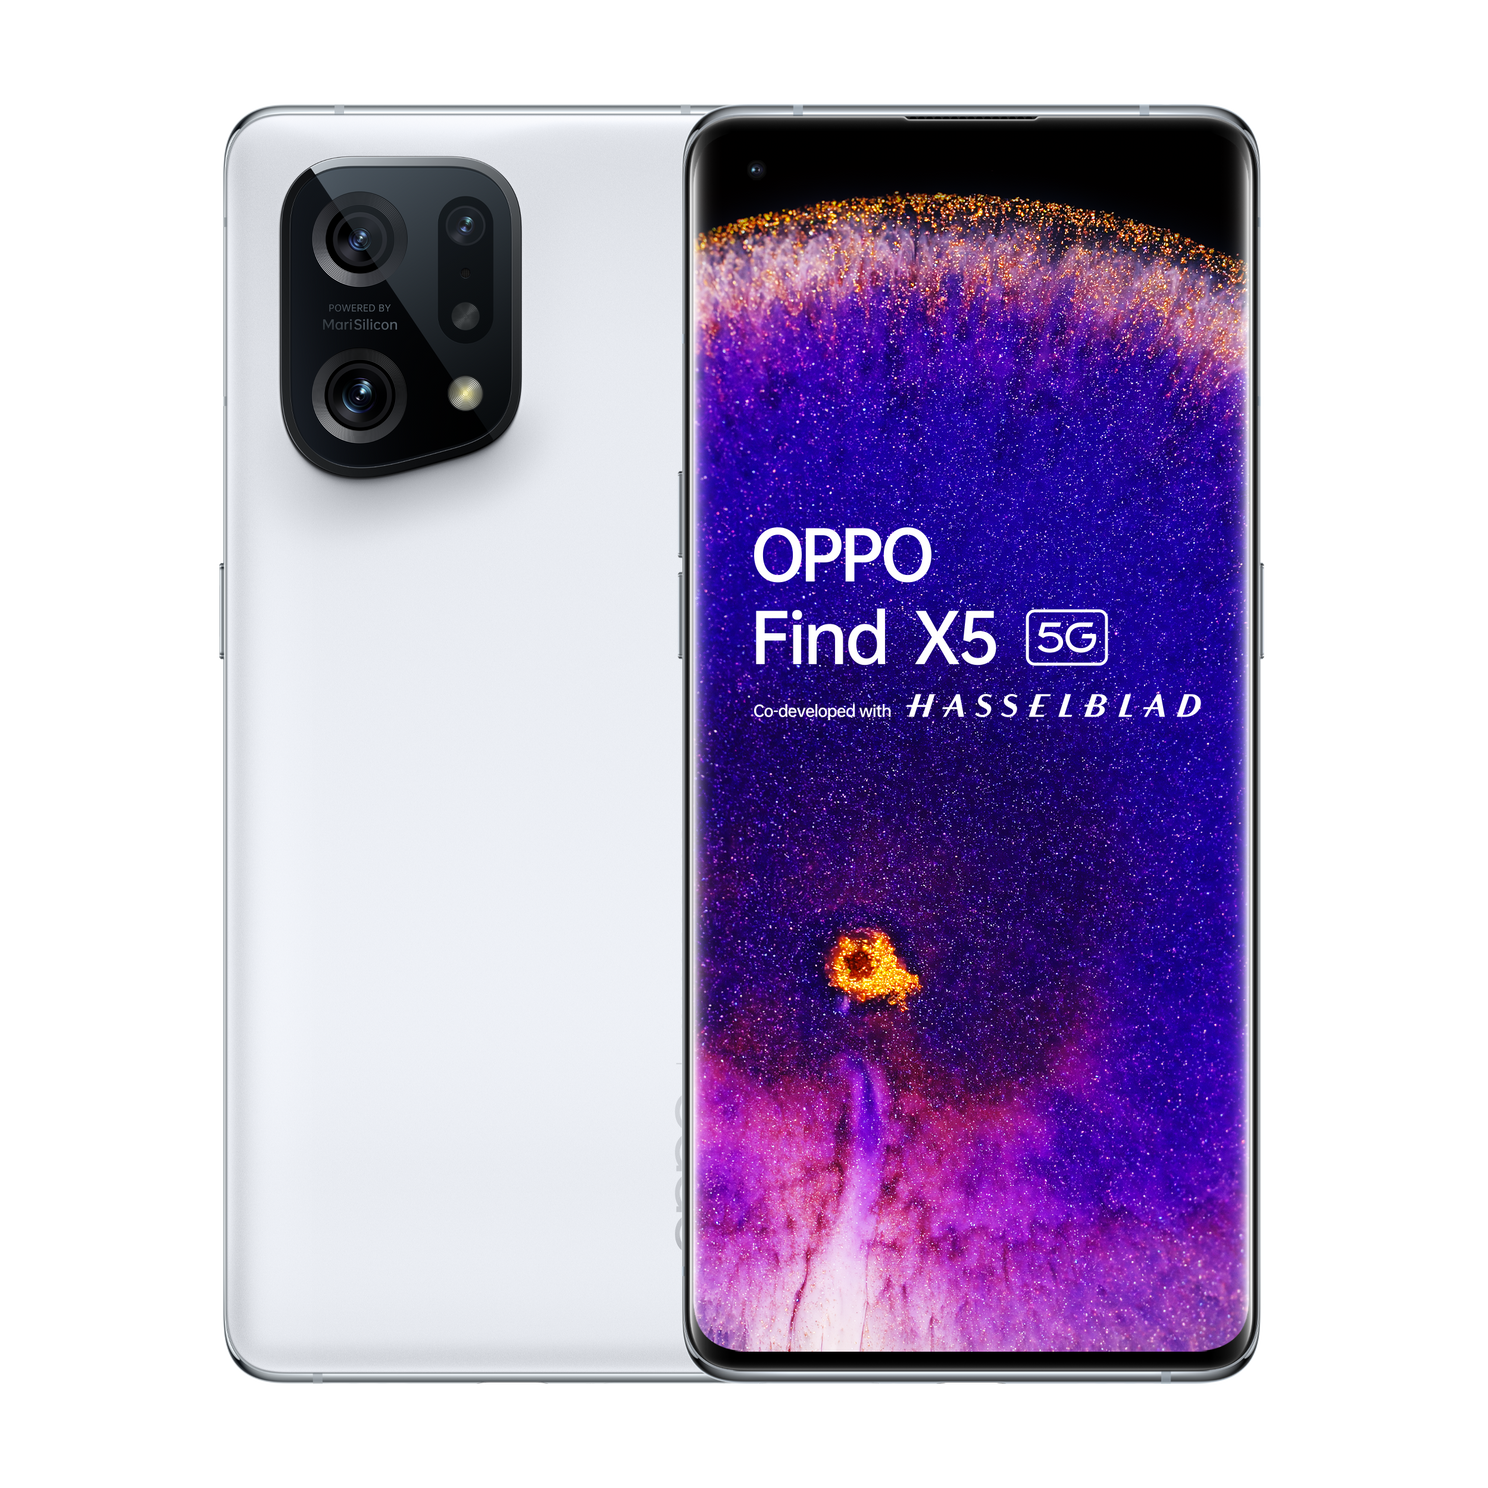 OPPO Find X5 Pro official: striking design and focus on night photography